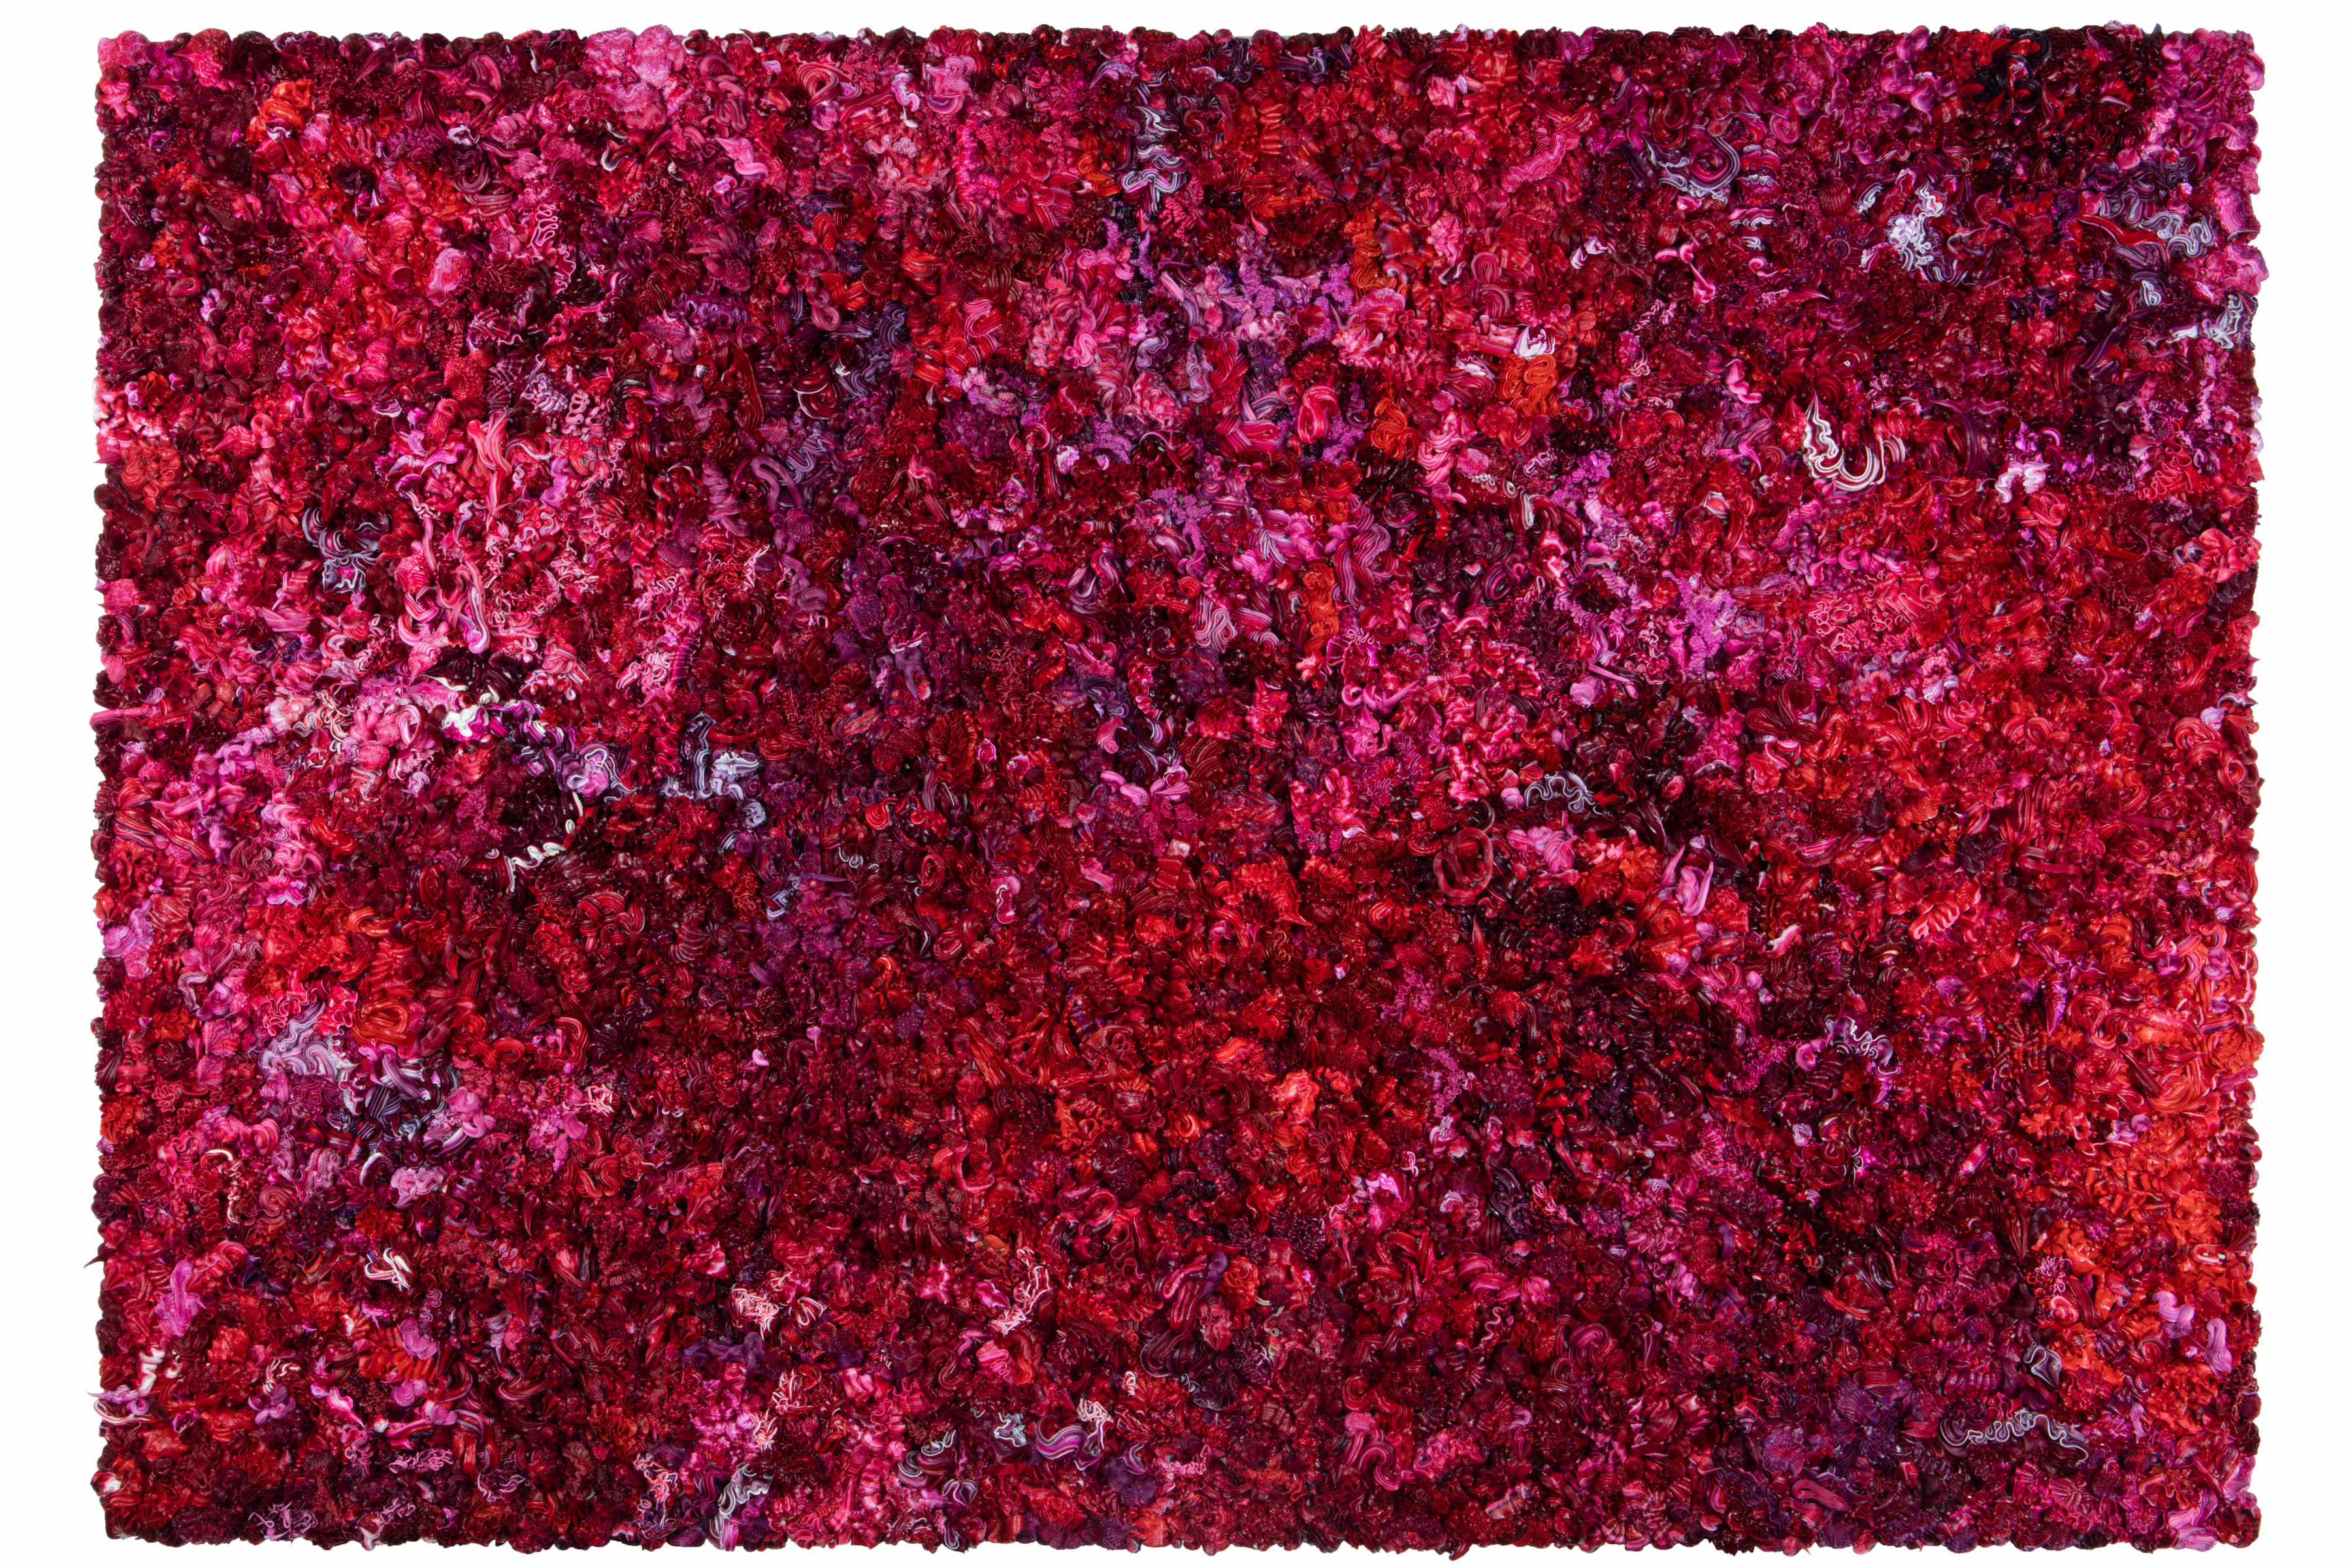 A series of dark red and purple whipped-cream-like dollops made of oil on a rectangular canvas